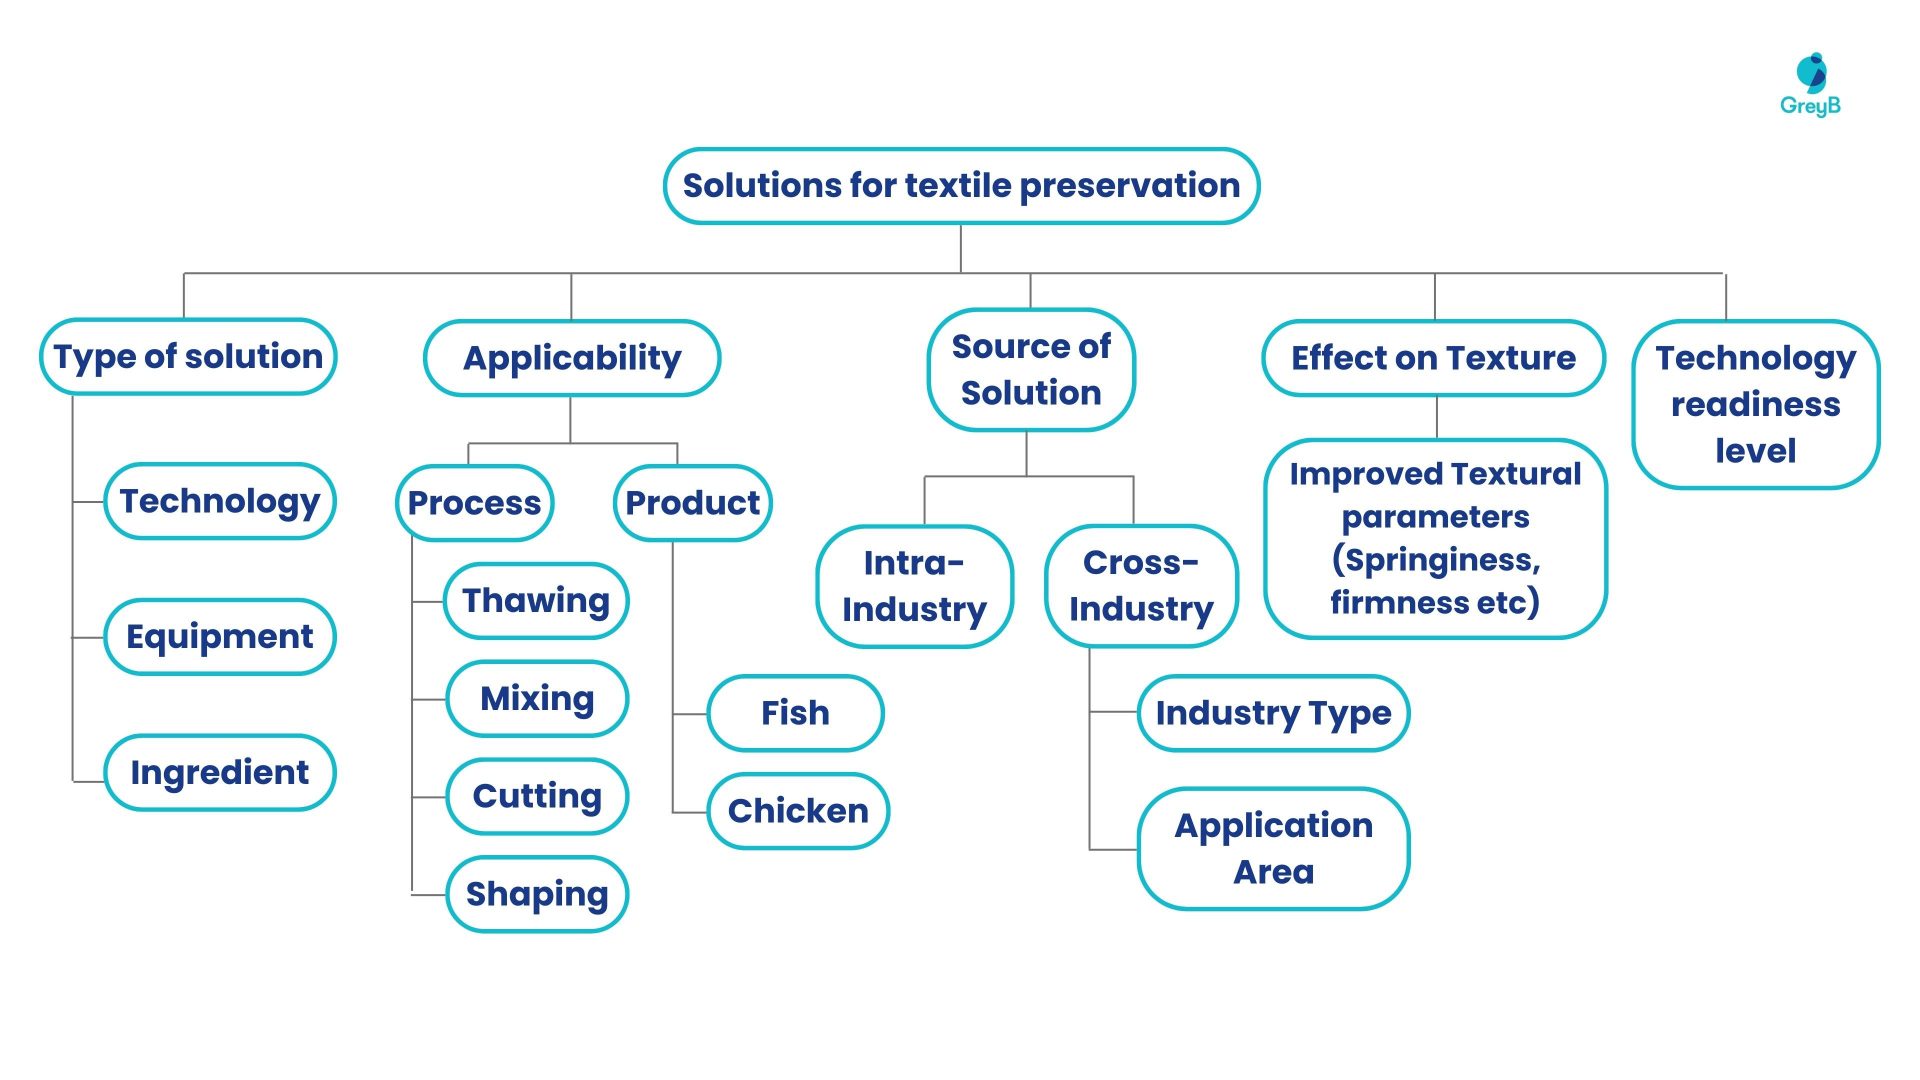 Solutions for textile preservation